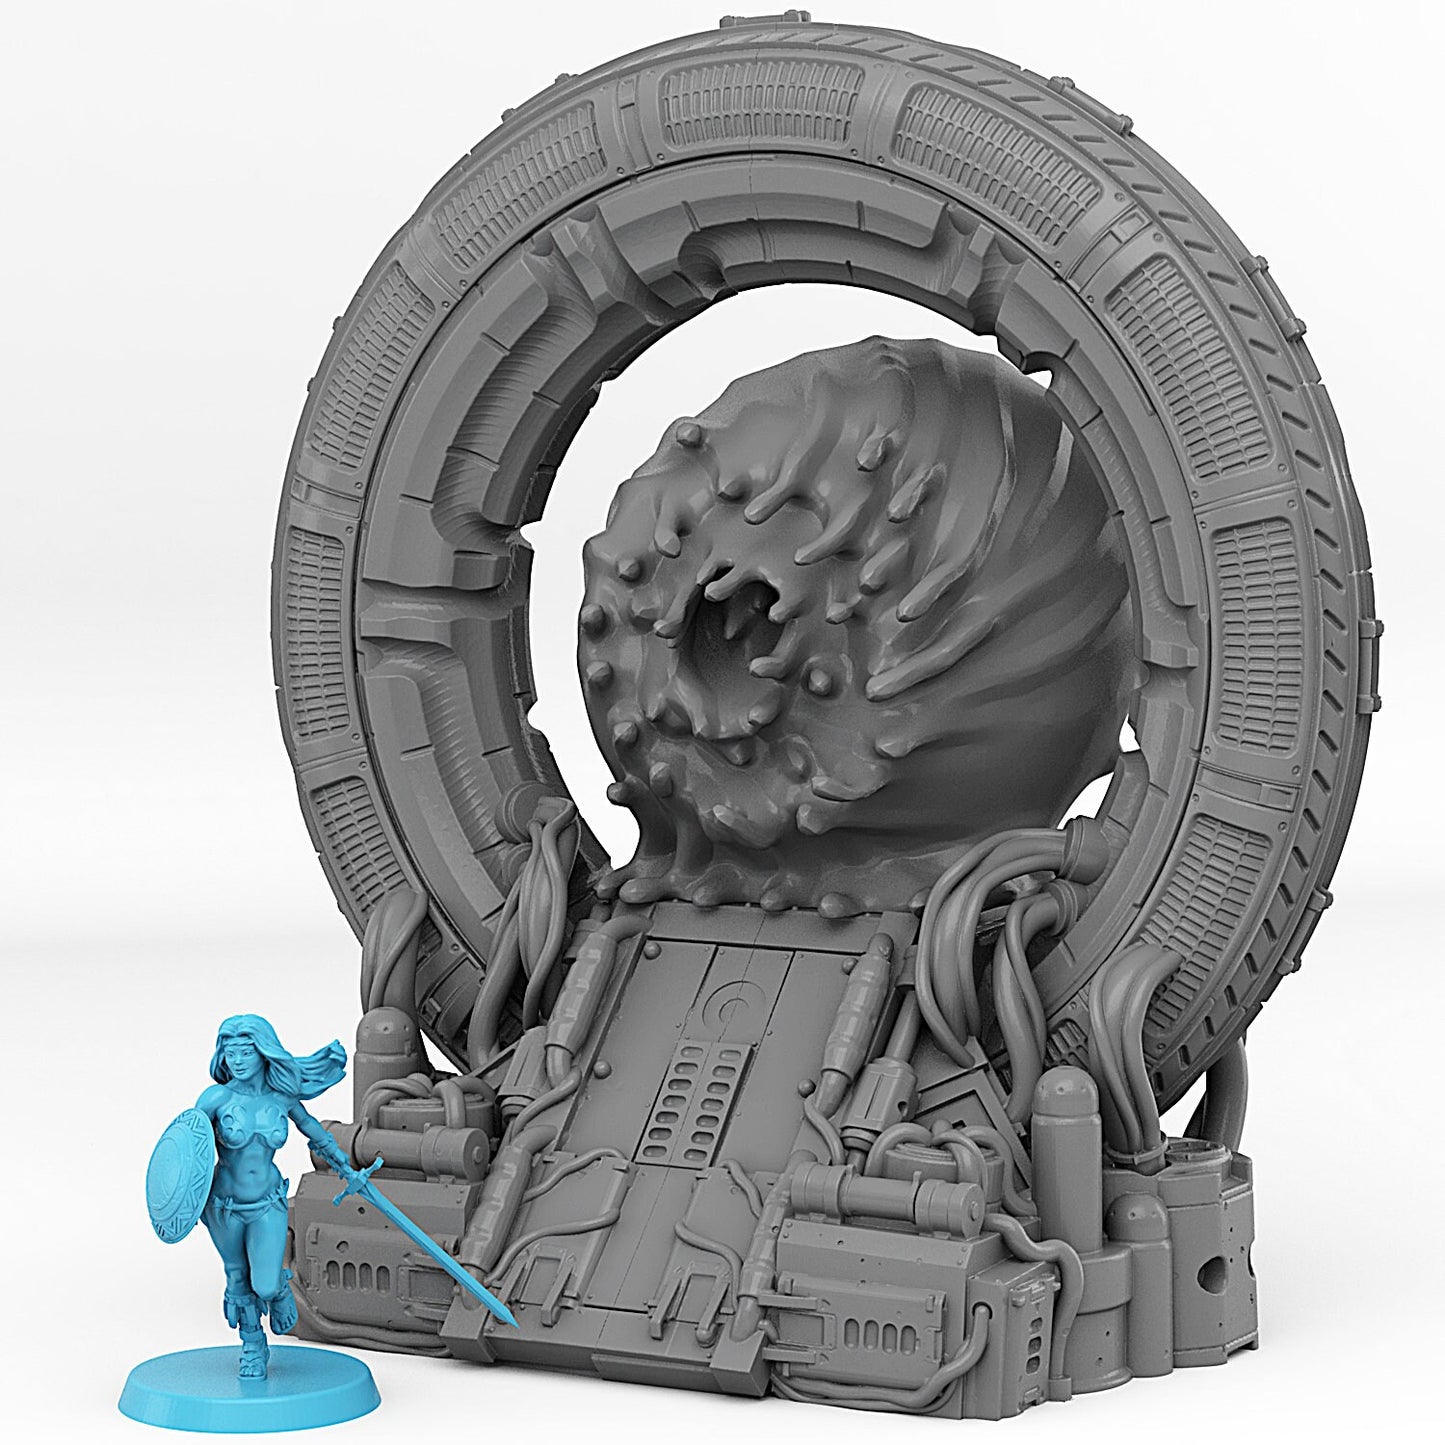 Stars Portal | Scenery and terrain | 3D Printed Resin Miniature | Tabletop Role Playing | AoS | D&D | 40K | Pathfinder